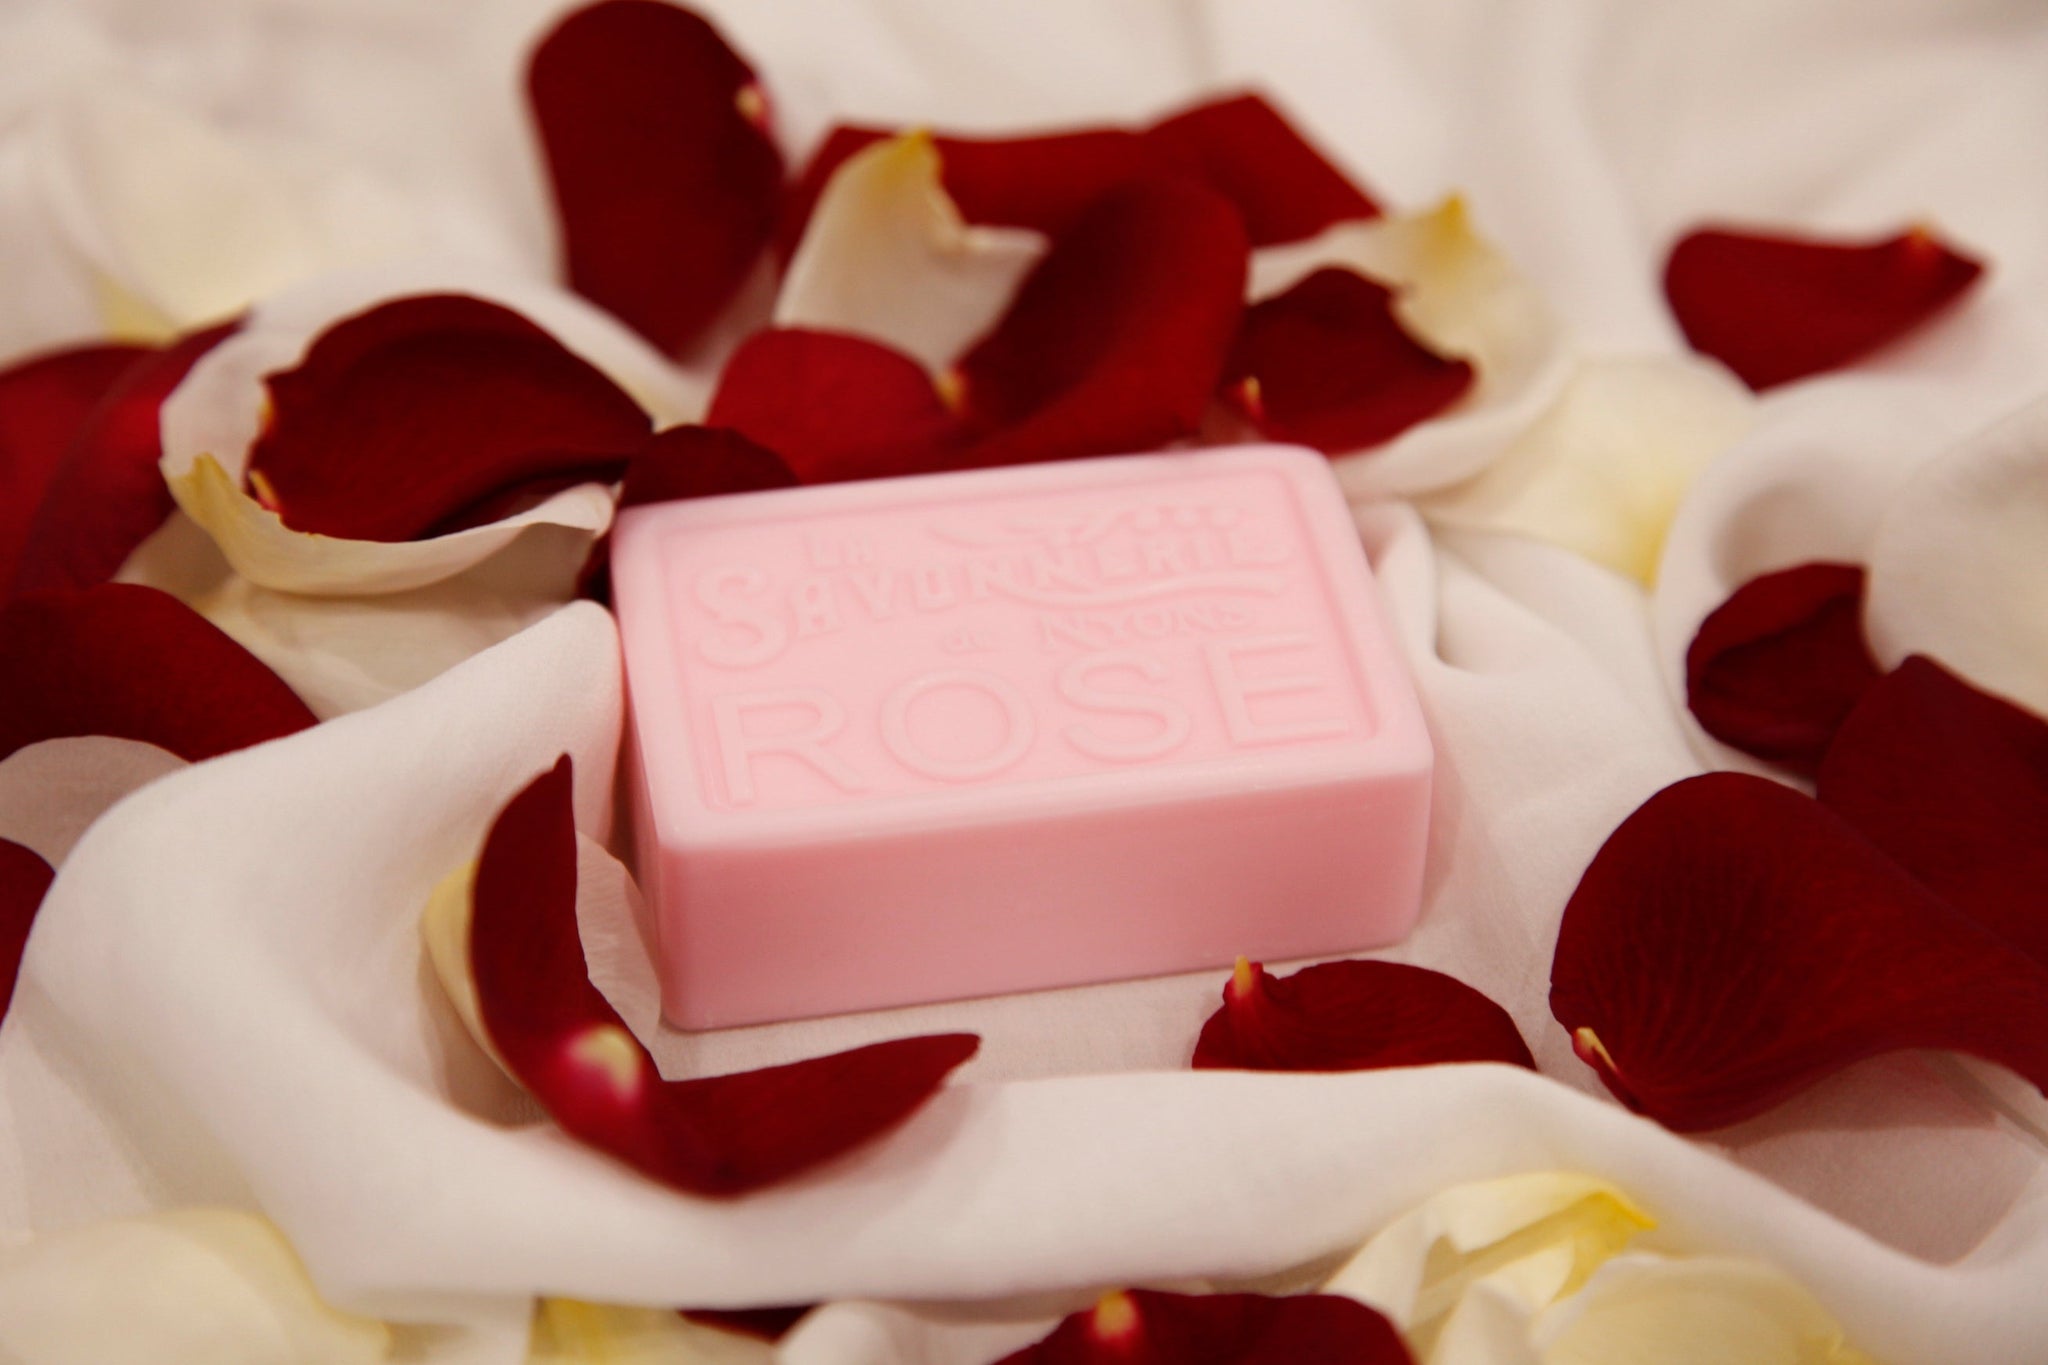 Pink bar of soap reading La Savonnerie de Nyons Rose surrounded by rose petals.